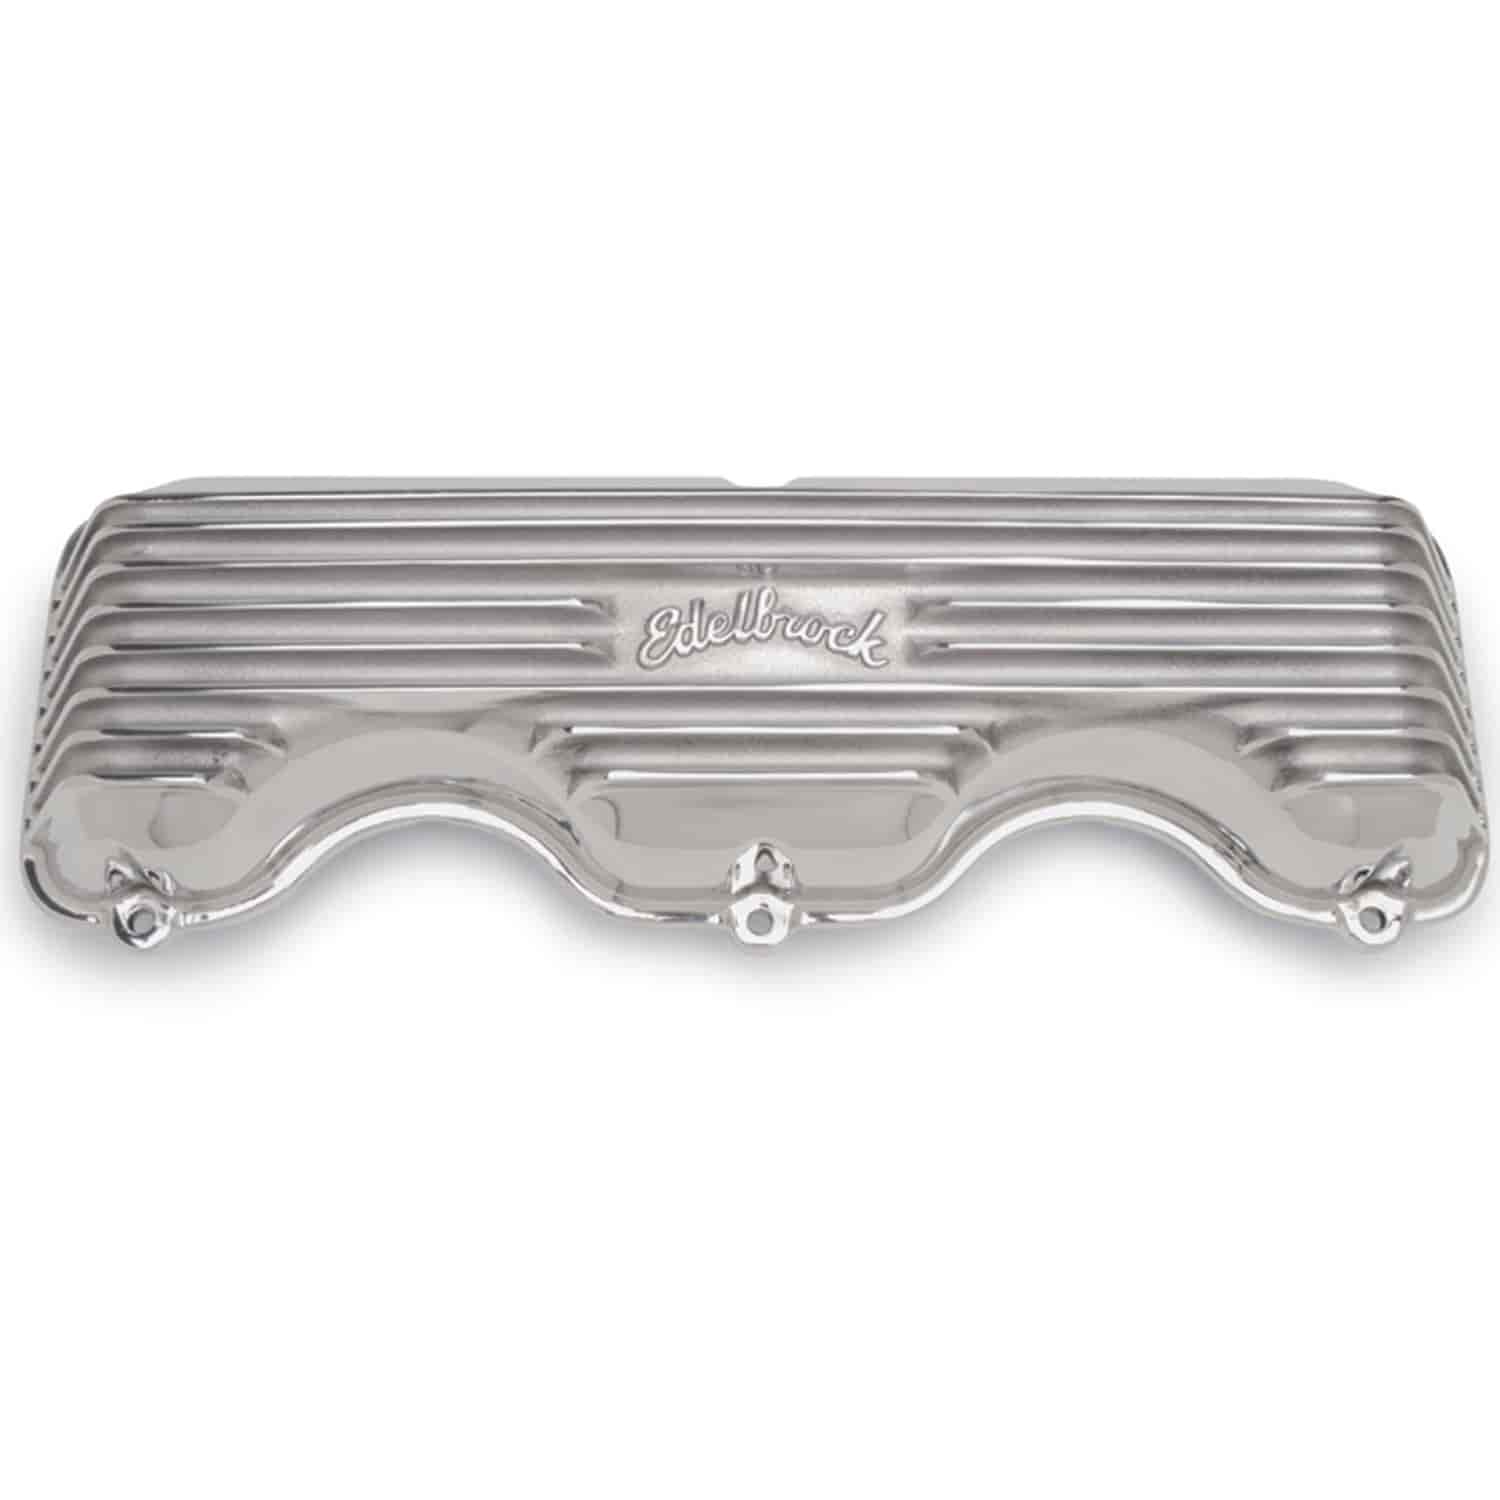 Classic Finned Valve Covers for Chevy W-Series 348/409